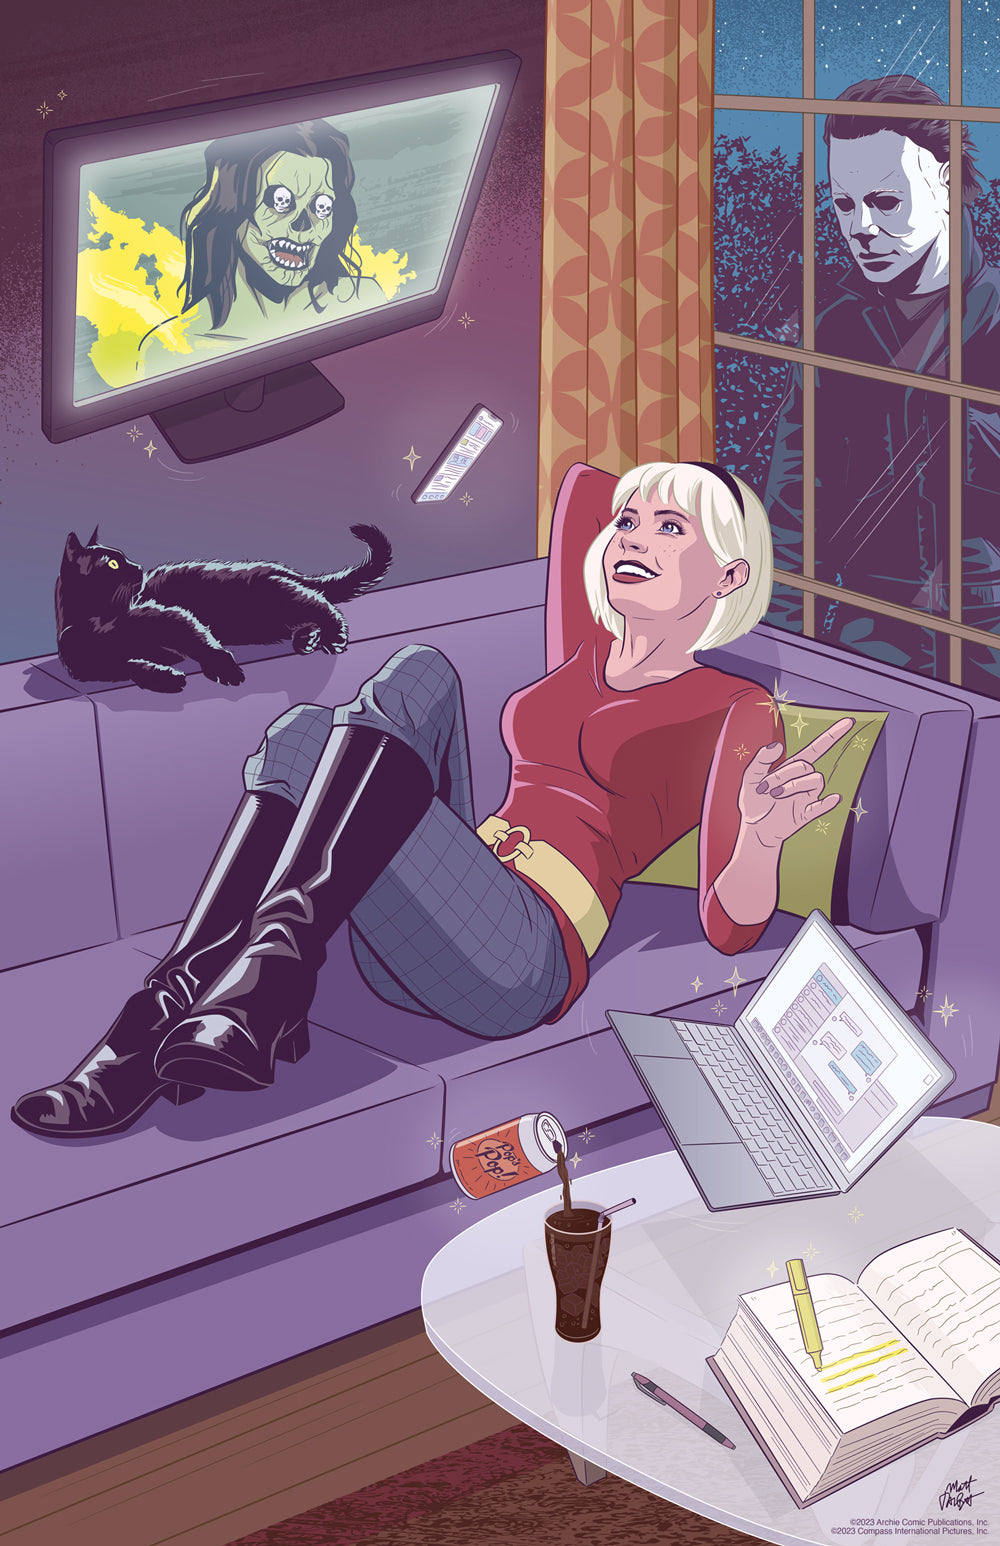 Art print by artist Matt Talbot of Sabrina the Teenage Witch on a couch, watching a TV displaying Madam Satan. Salem the cat is noticing that Michael Myers is standing outside, watching them from the window.